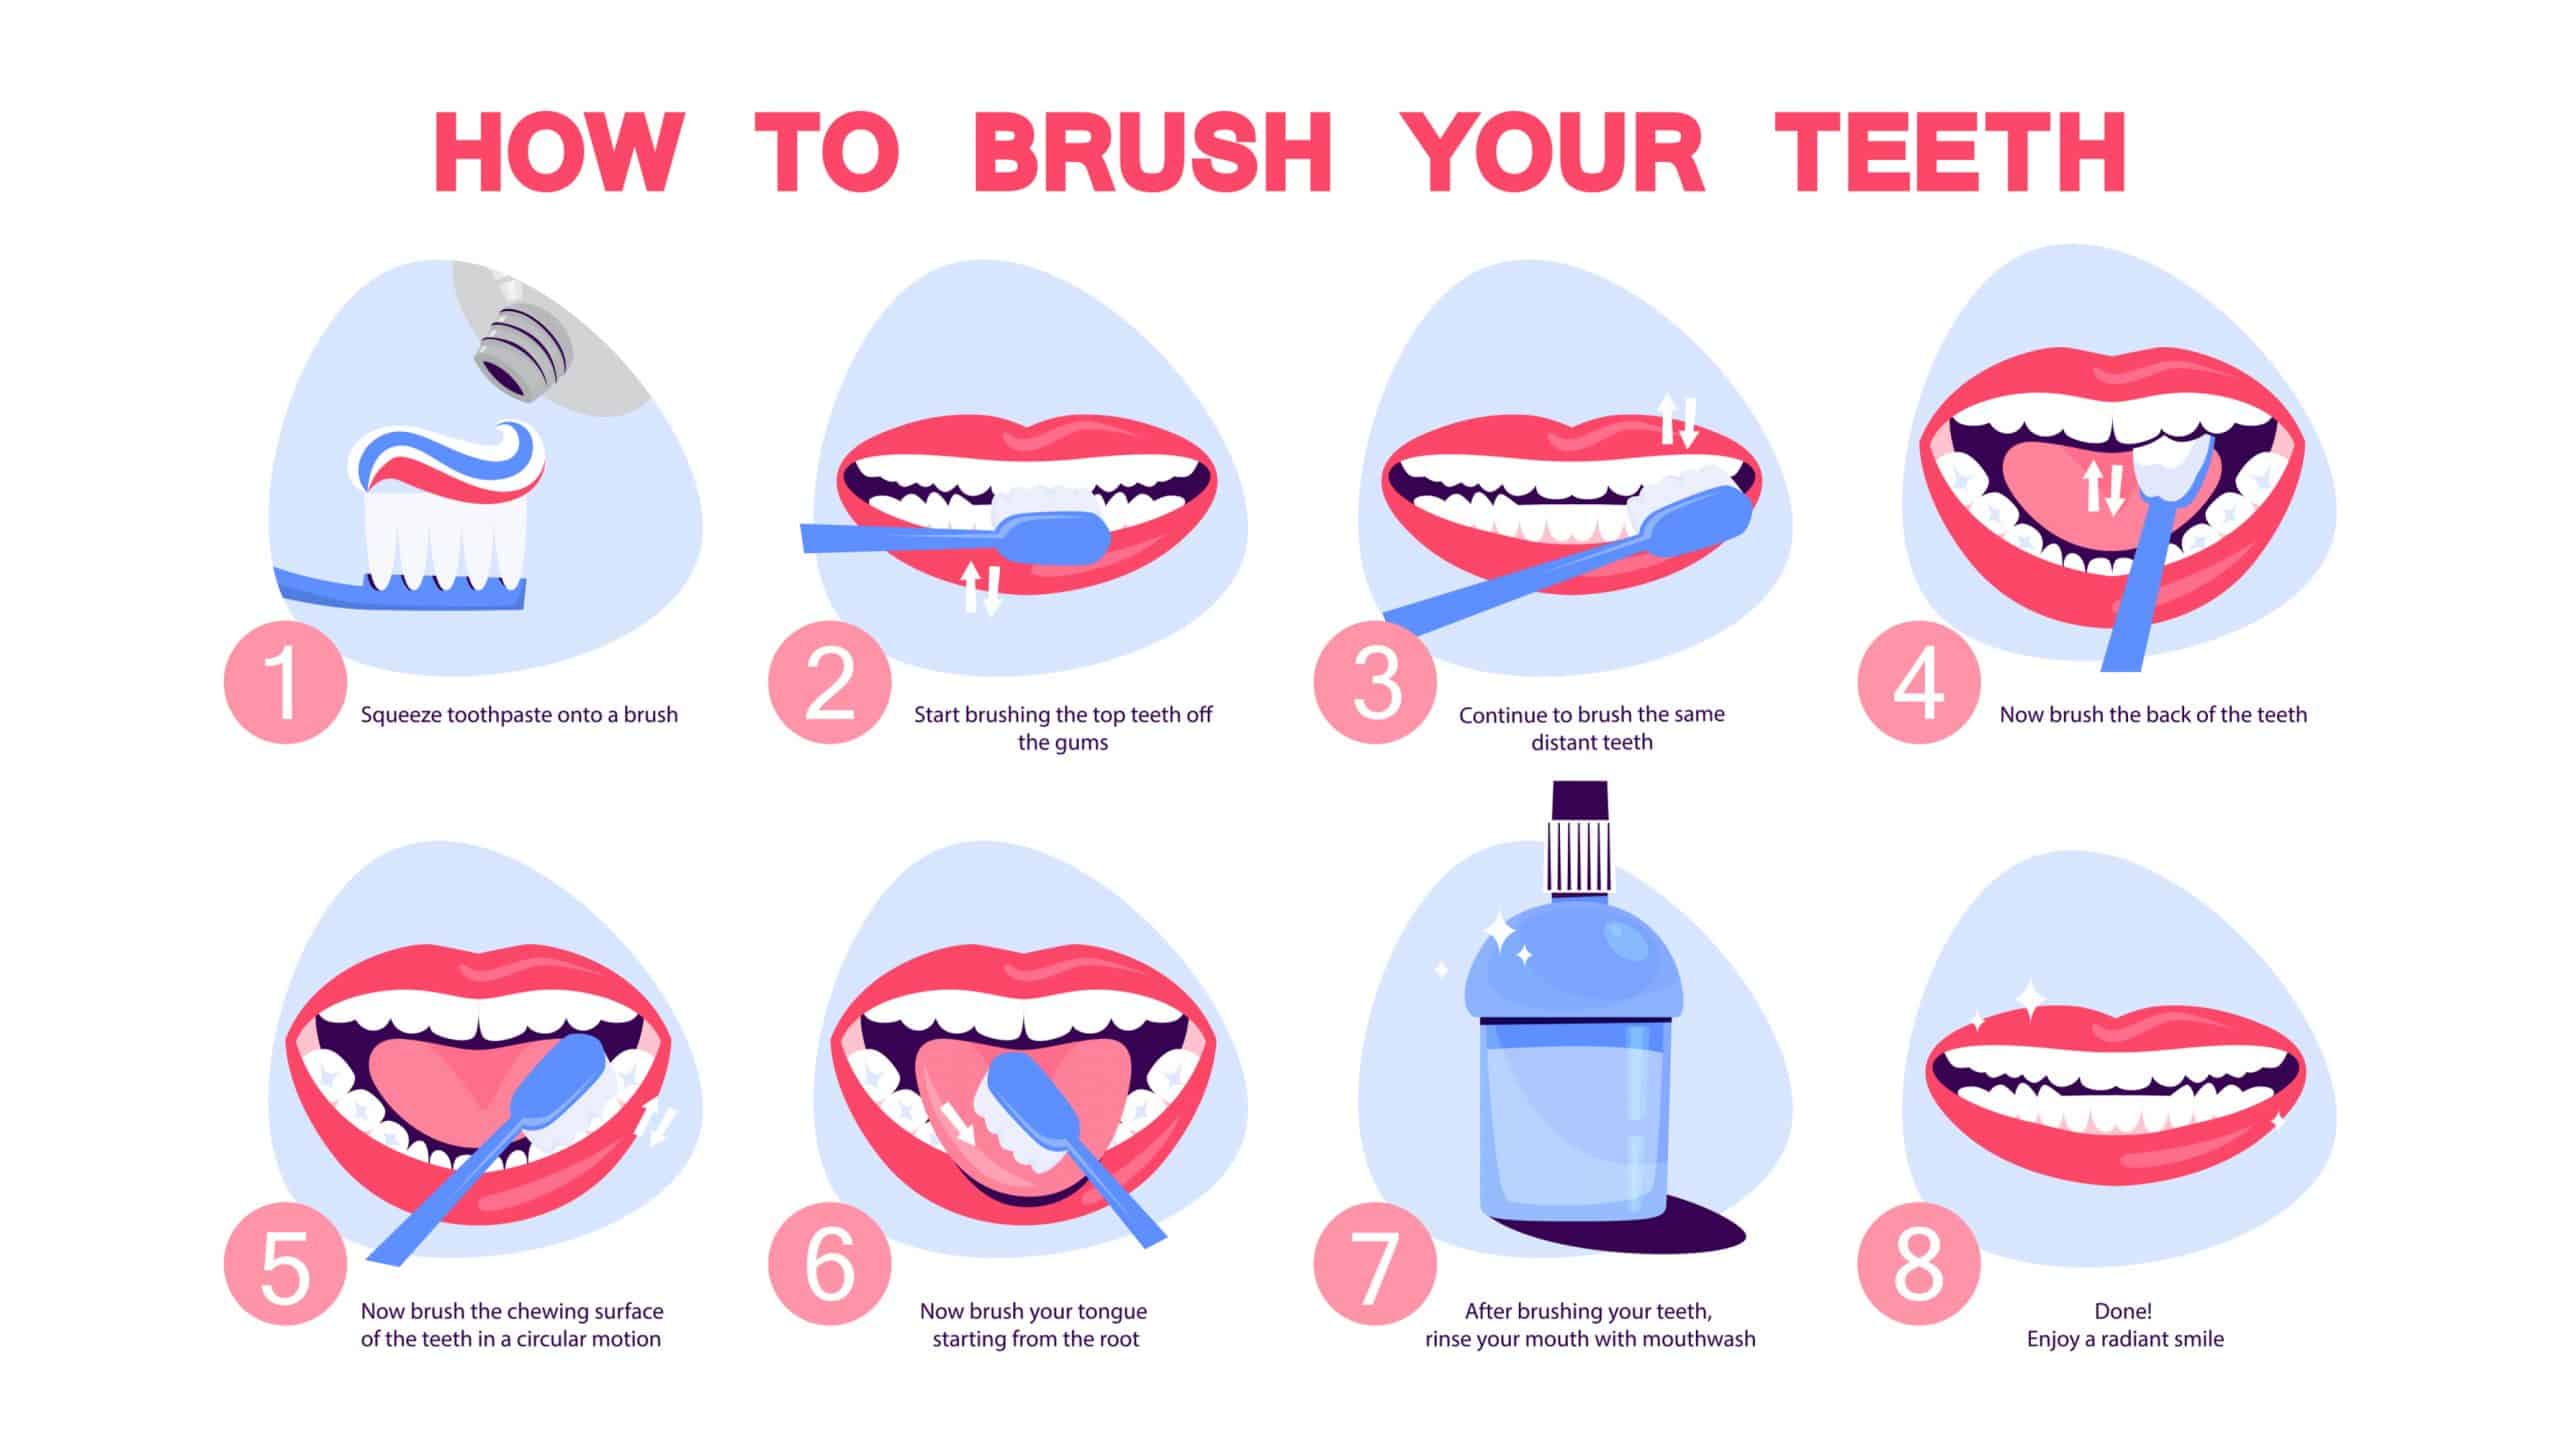 Should I Brush My Teeth After Using Teeth Whitening Tapes?